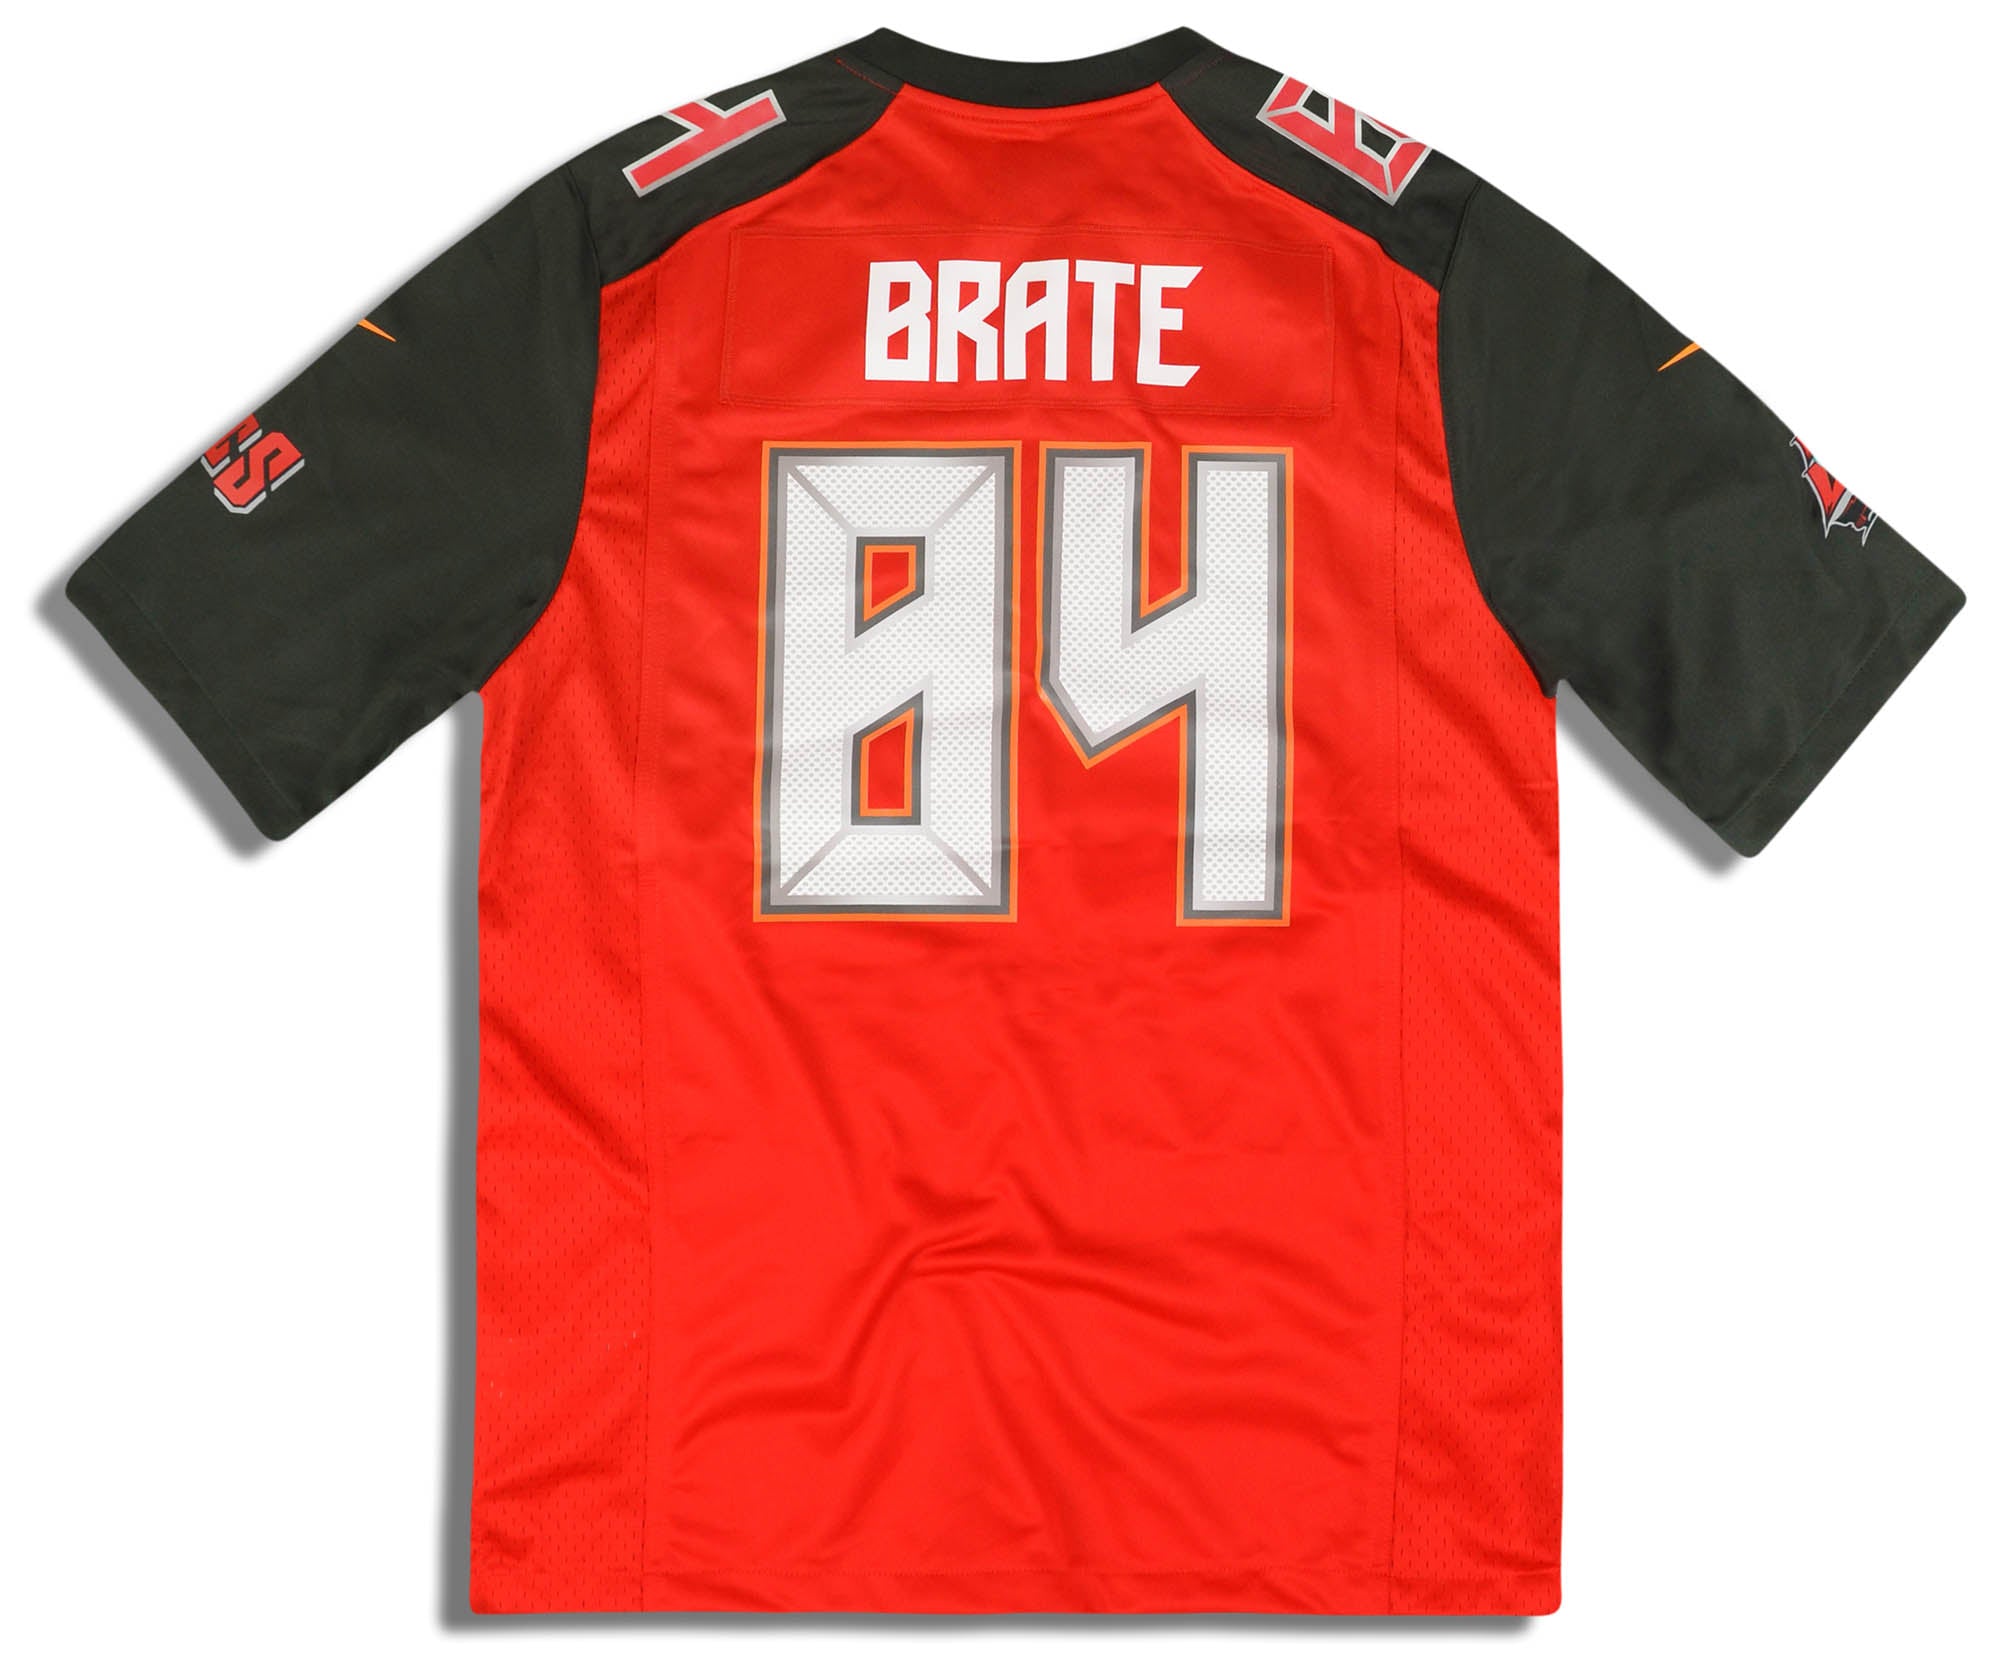 2018 TAMPA BAY BUCCANEERS BRATE #84 NIKE GAME JERSEY (HOME) M - W/TAGS